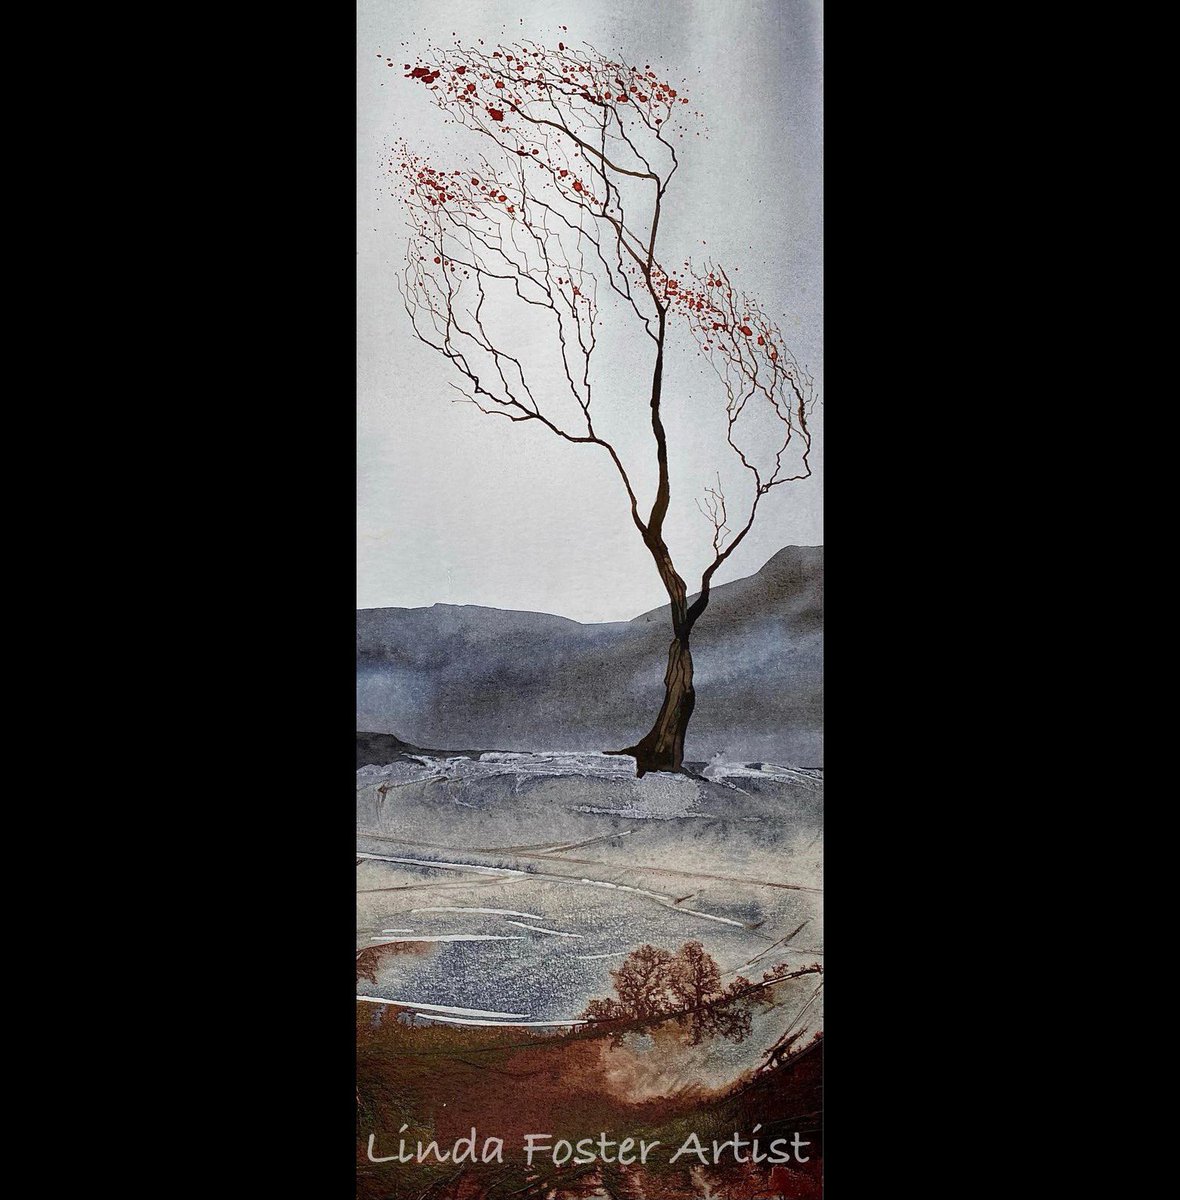 Back to lonesome trees today. Watercolour. 42cm x 16cm. #atlast #apieceofwork #lonesometree #relief